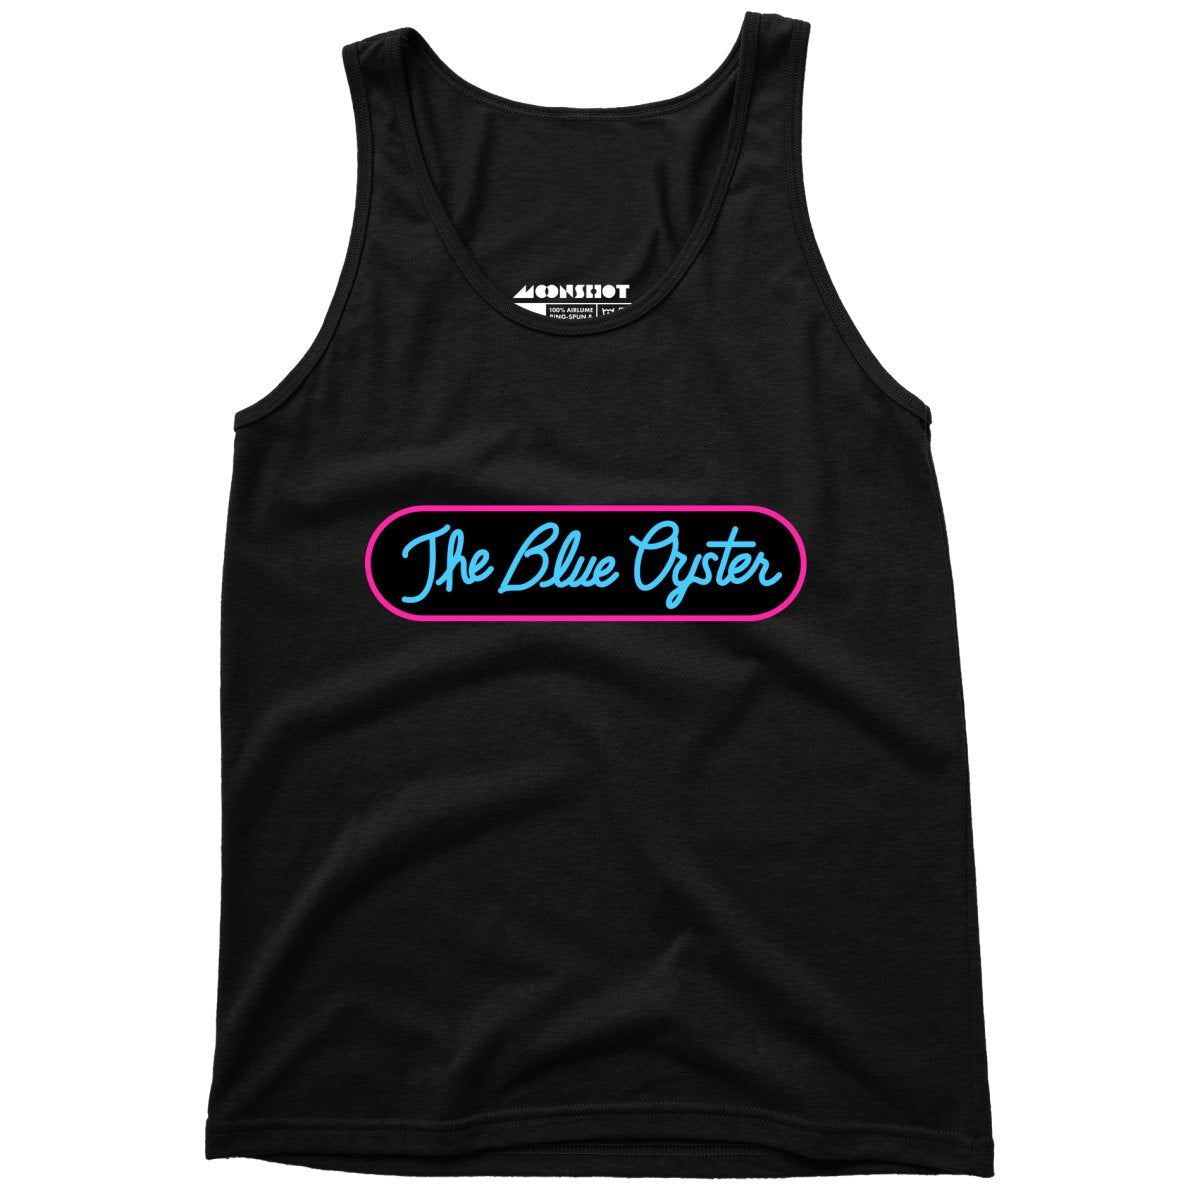 The Blue Oyster - Unisex Tank Top